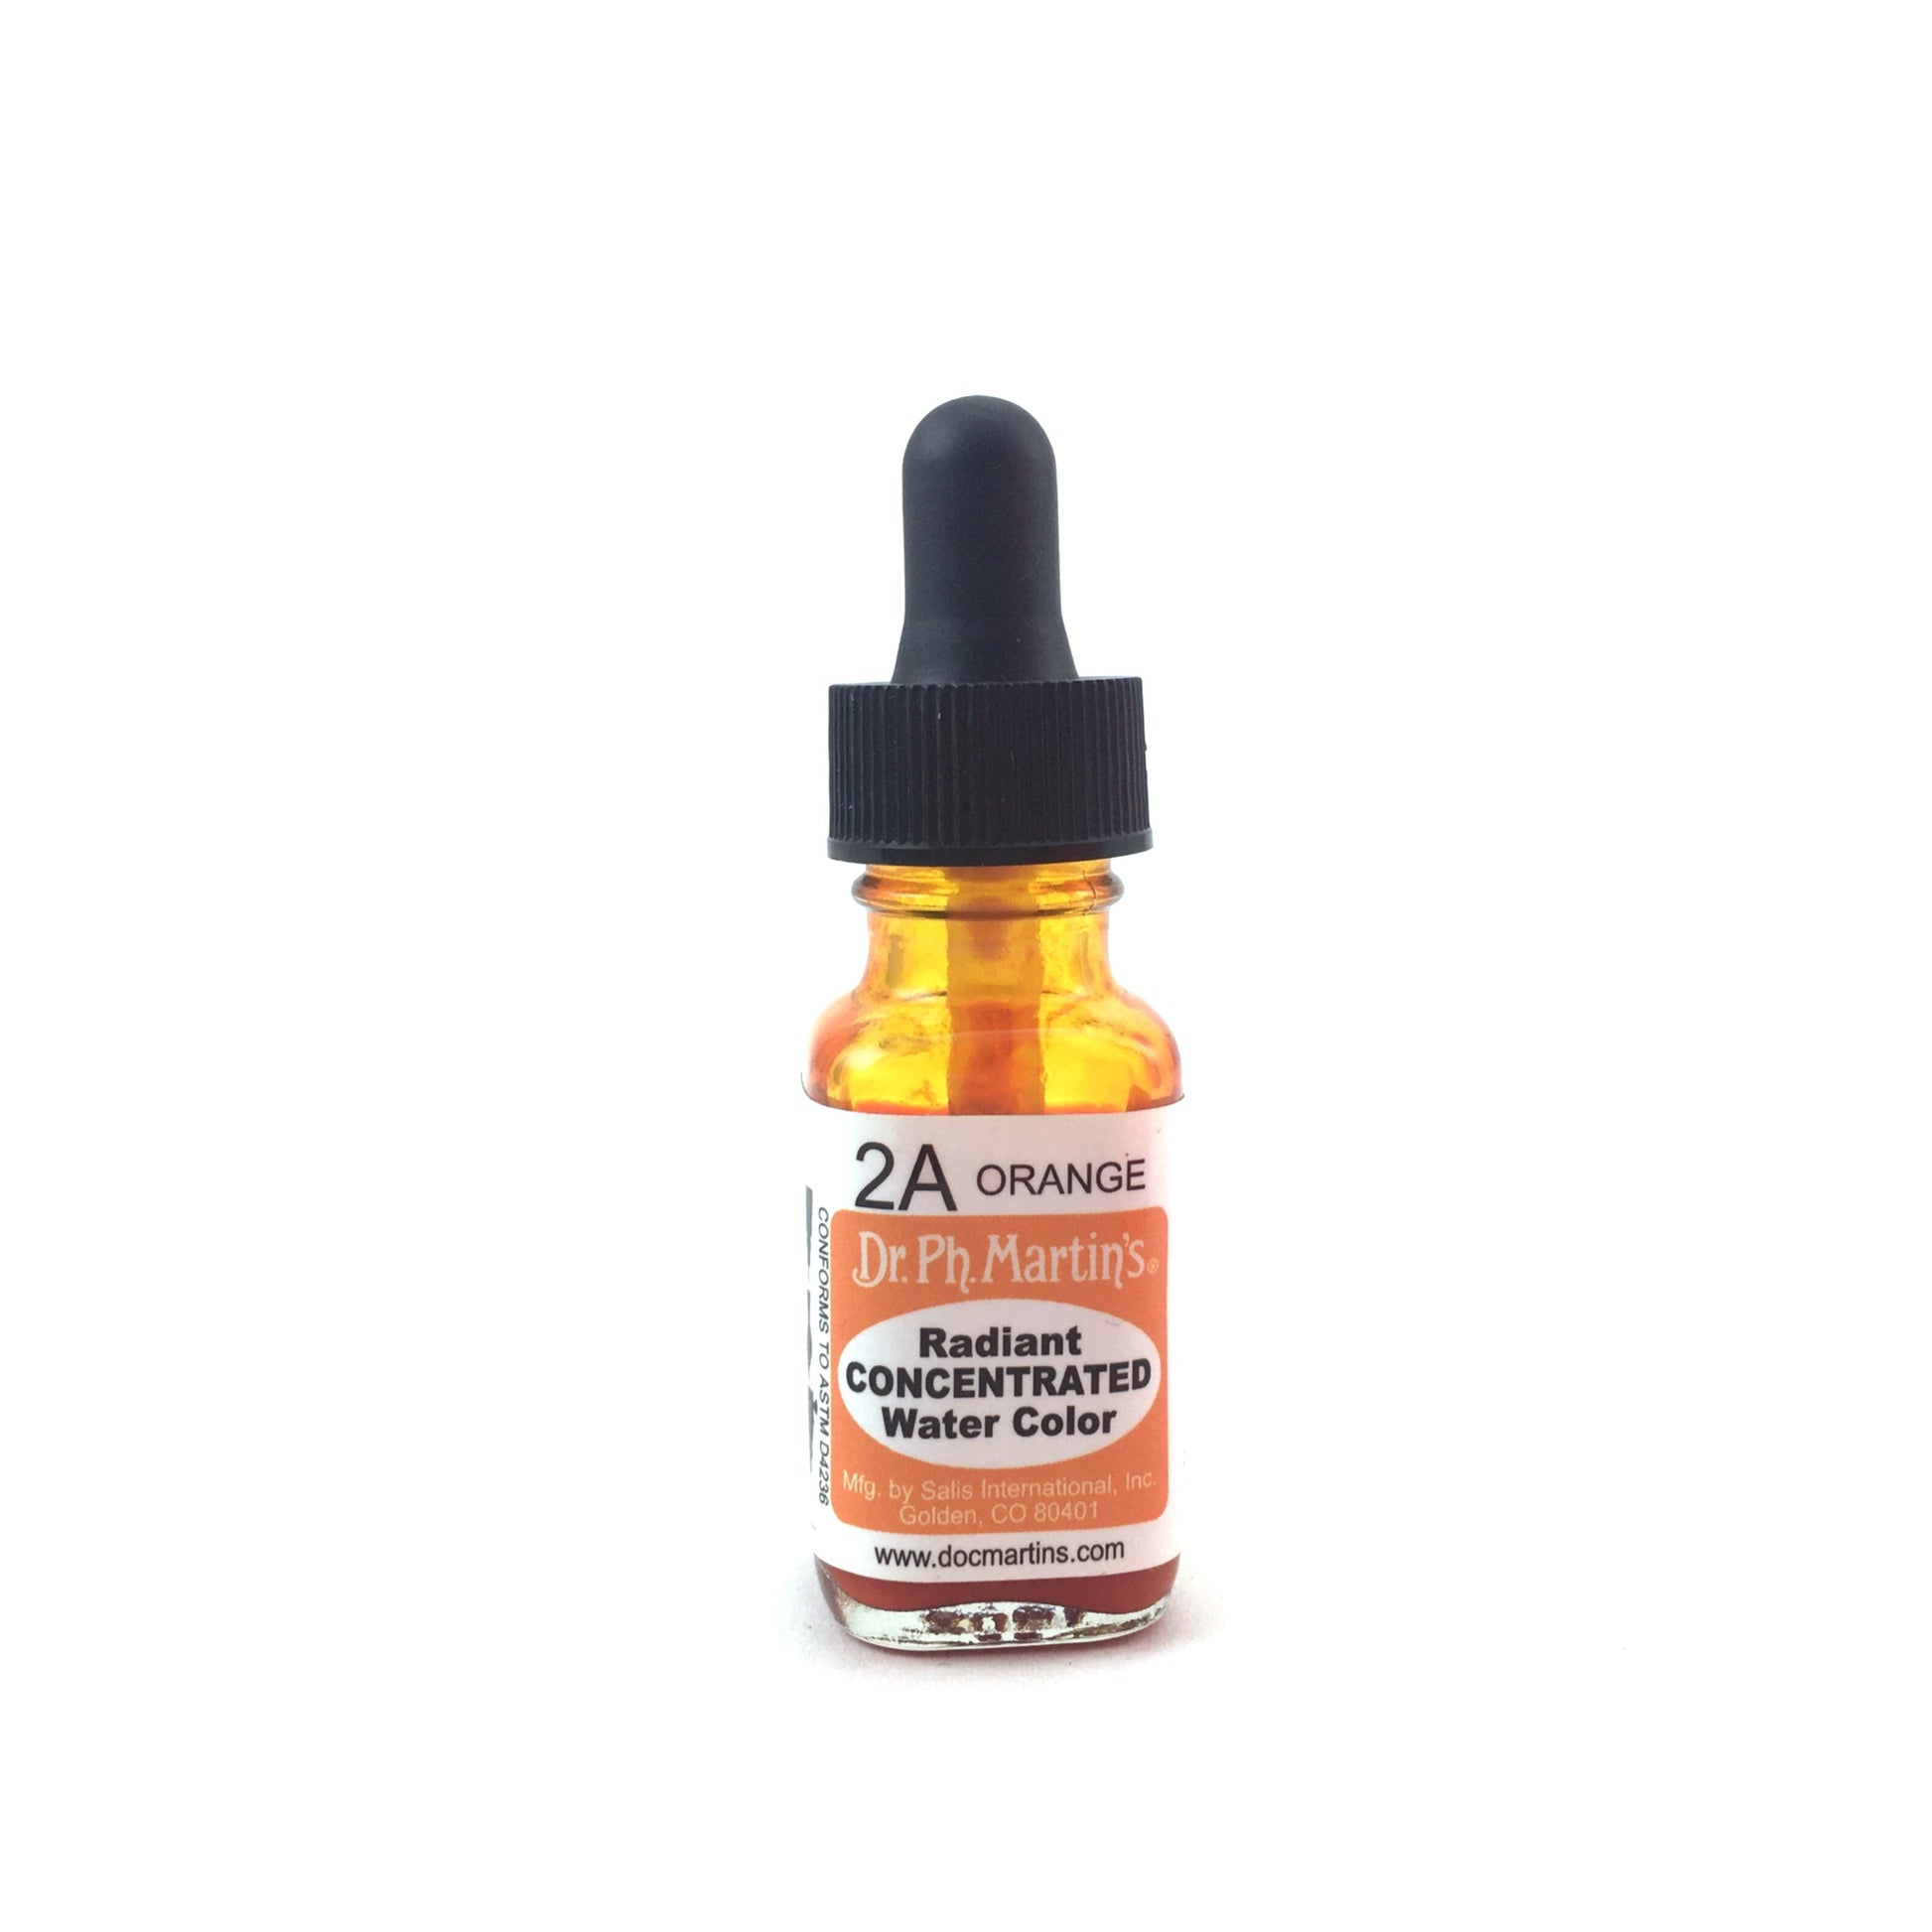 Dr. Ph. Martin's Radiant Concentrated Watercolor - .50 oz. - 2A - Orange by Dr. Ph. Martin’s - K. A. Artist Shop